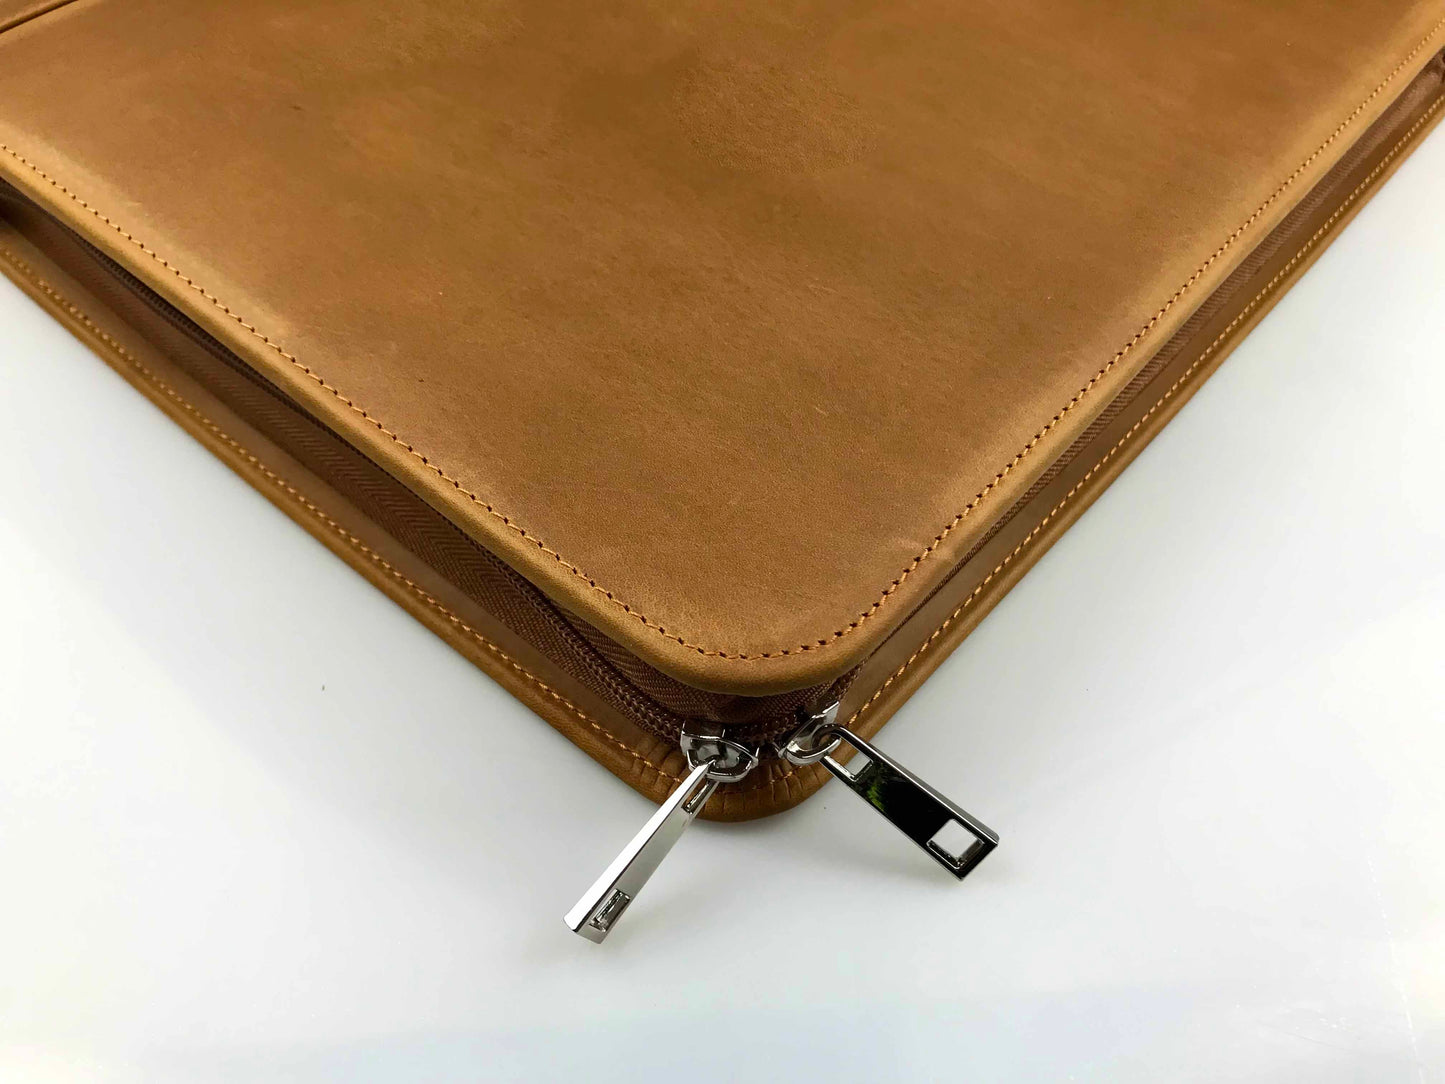 Genuine Leather Portfolio, 3 Ring Binder, Zipper Padfolio for Legal Paper 8.5" x 11"/ 8.5" x 14"/ A4 Letter Size Notepad/ MacBook 13", Gift (Tan)